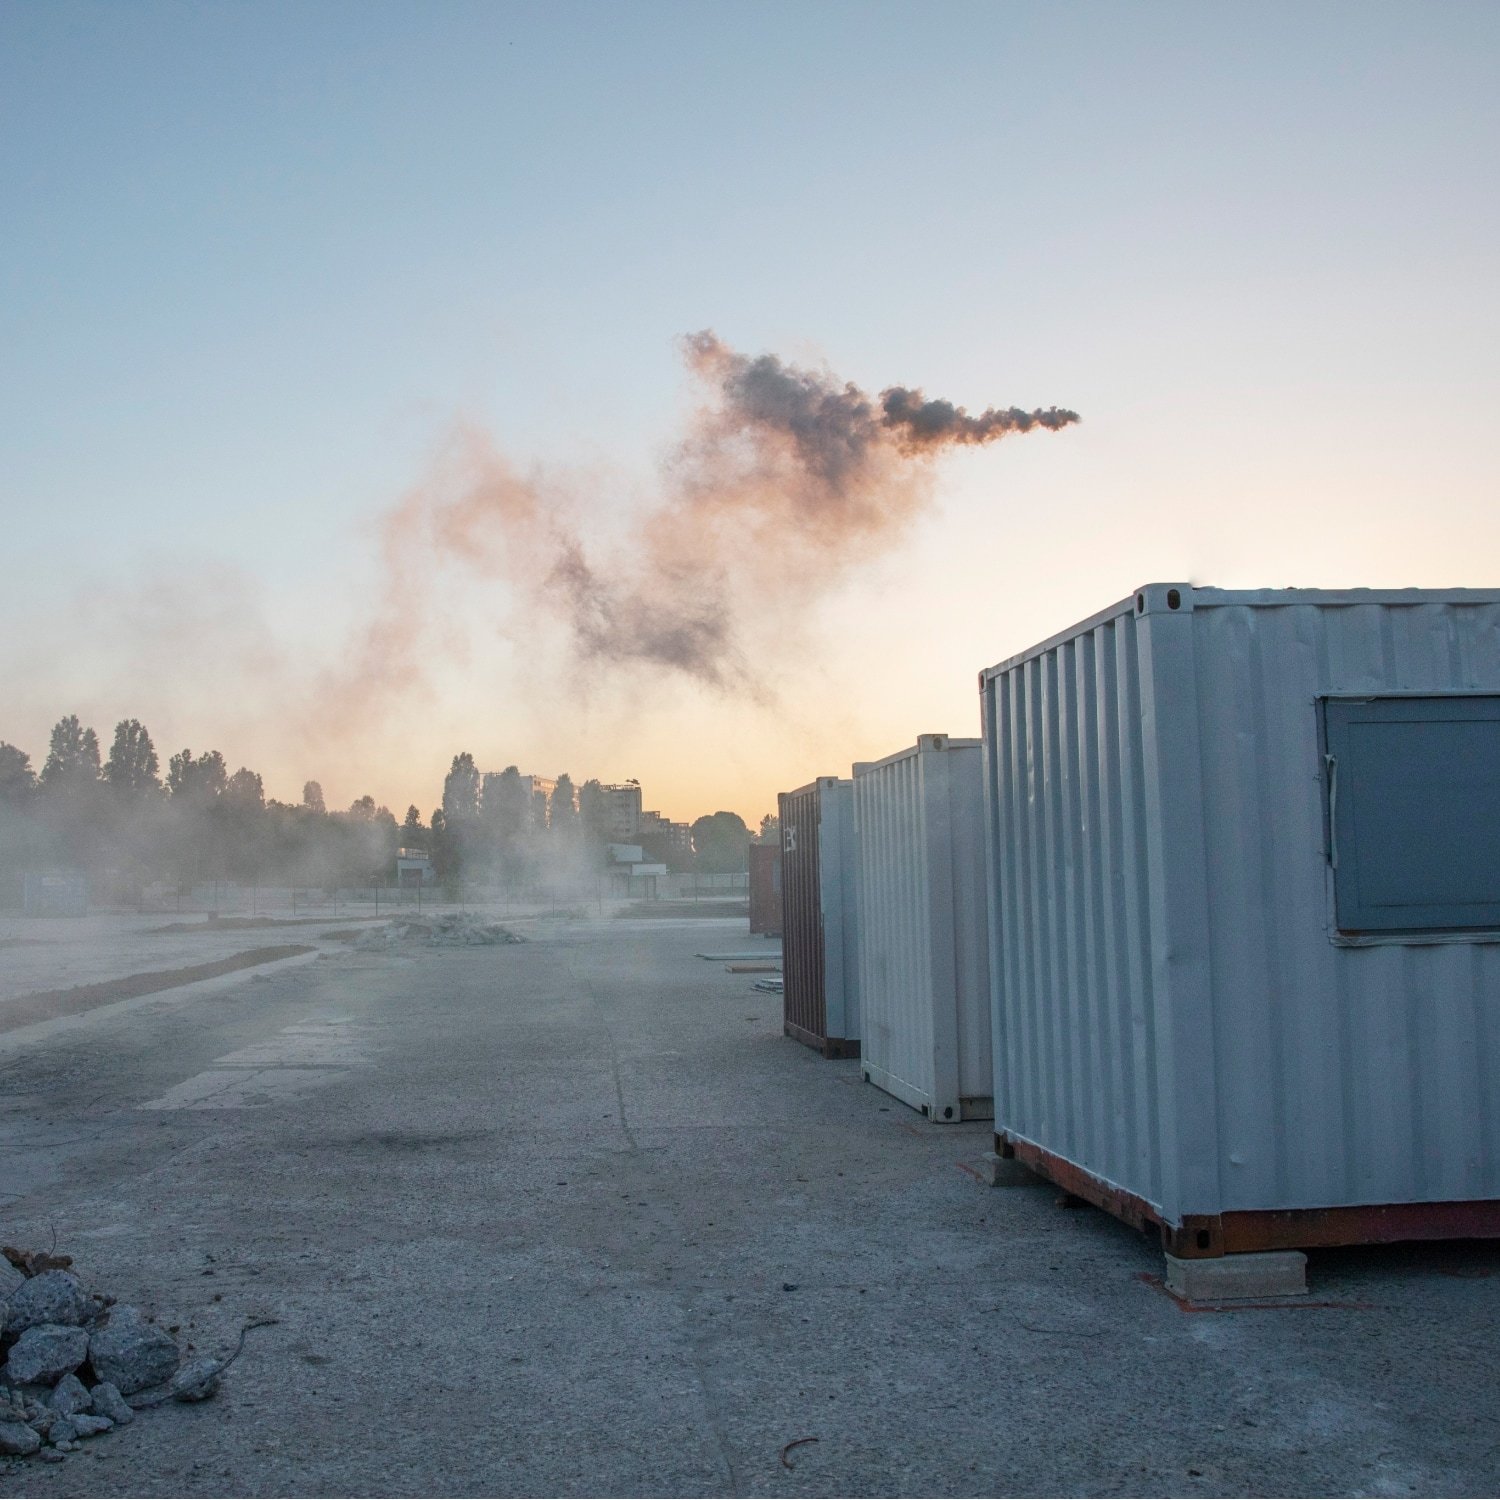 Containers on concrete, rubble and smoke